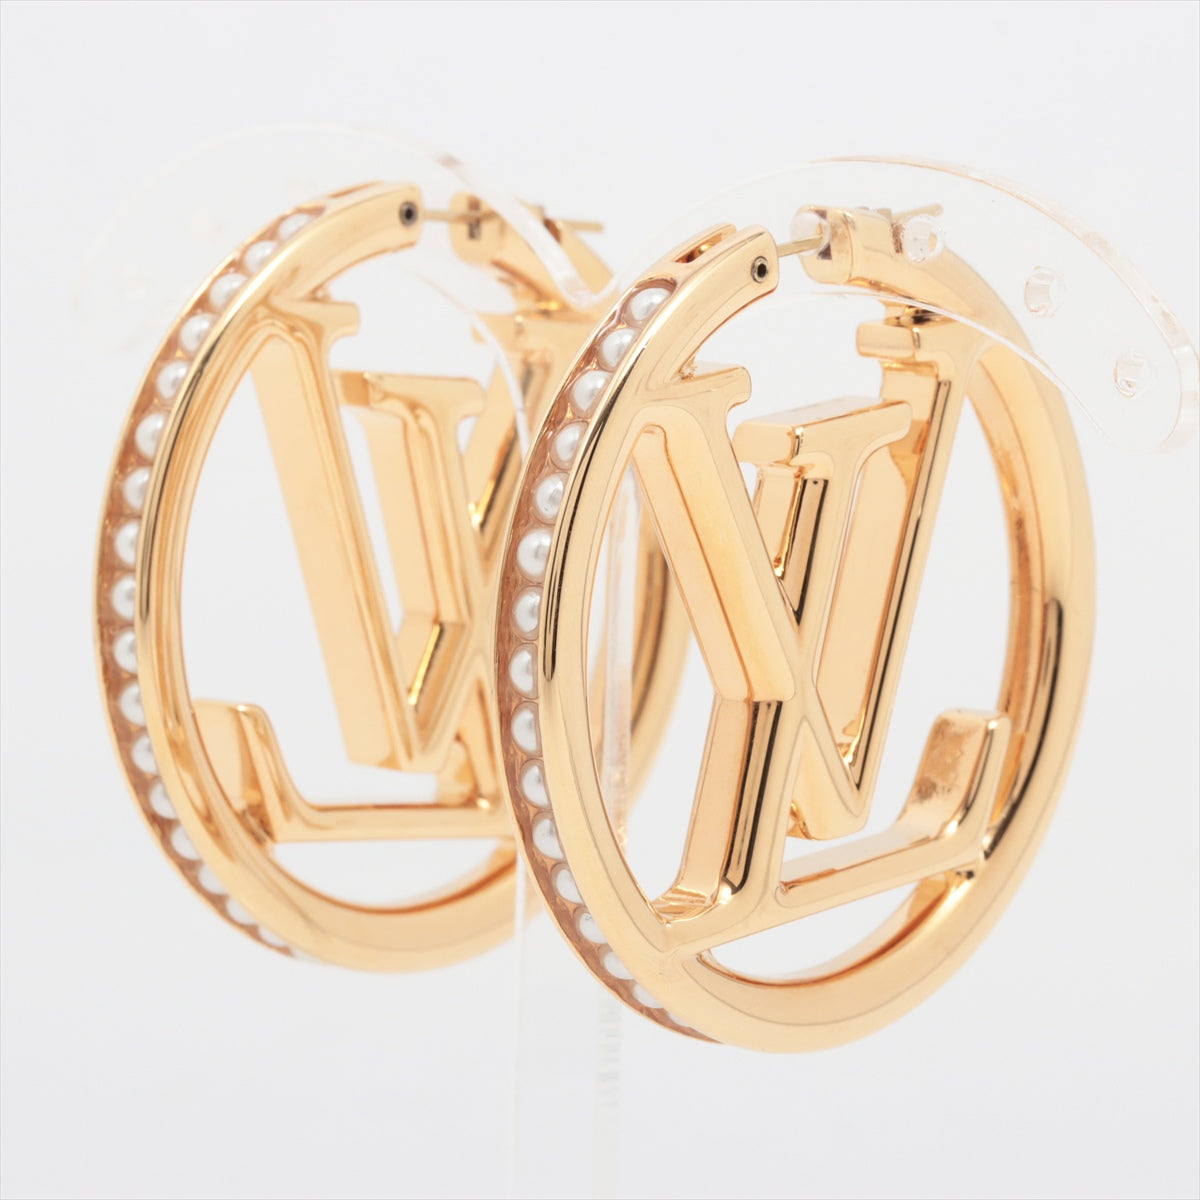 Louis Vuitton LE3233 Piercing jewelry (for both ears) GP x Imitation pearl Gold M01329 Piercing jewelry Hoop Louise Pearl